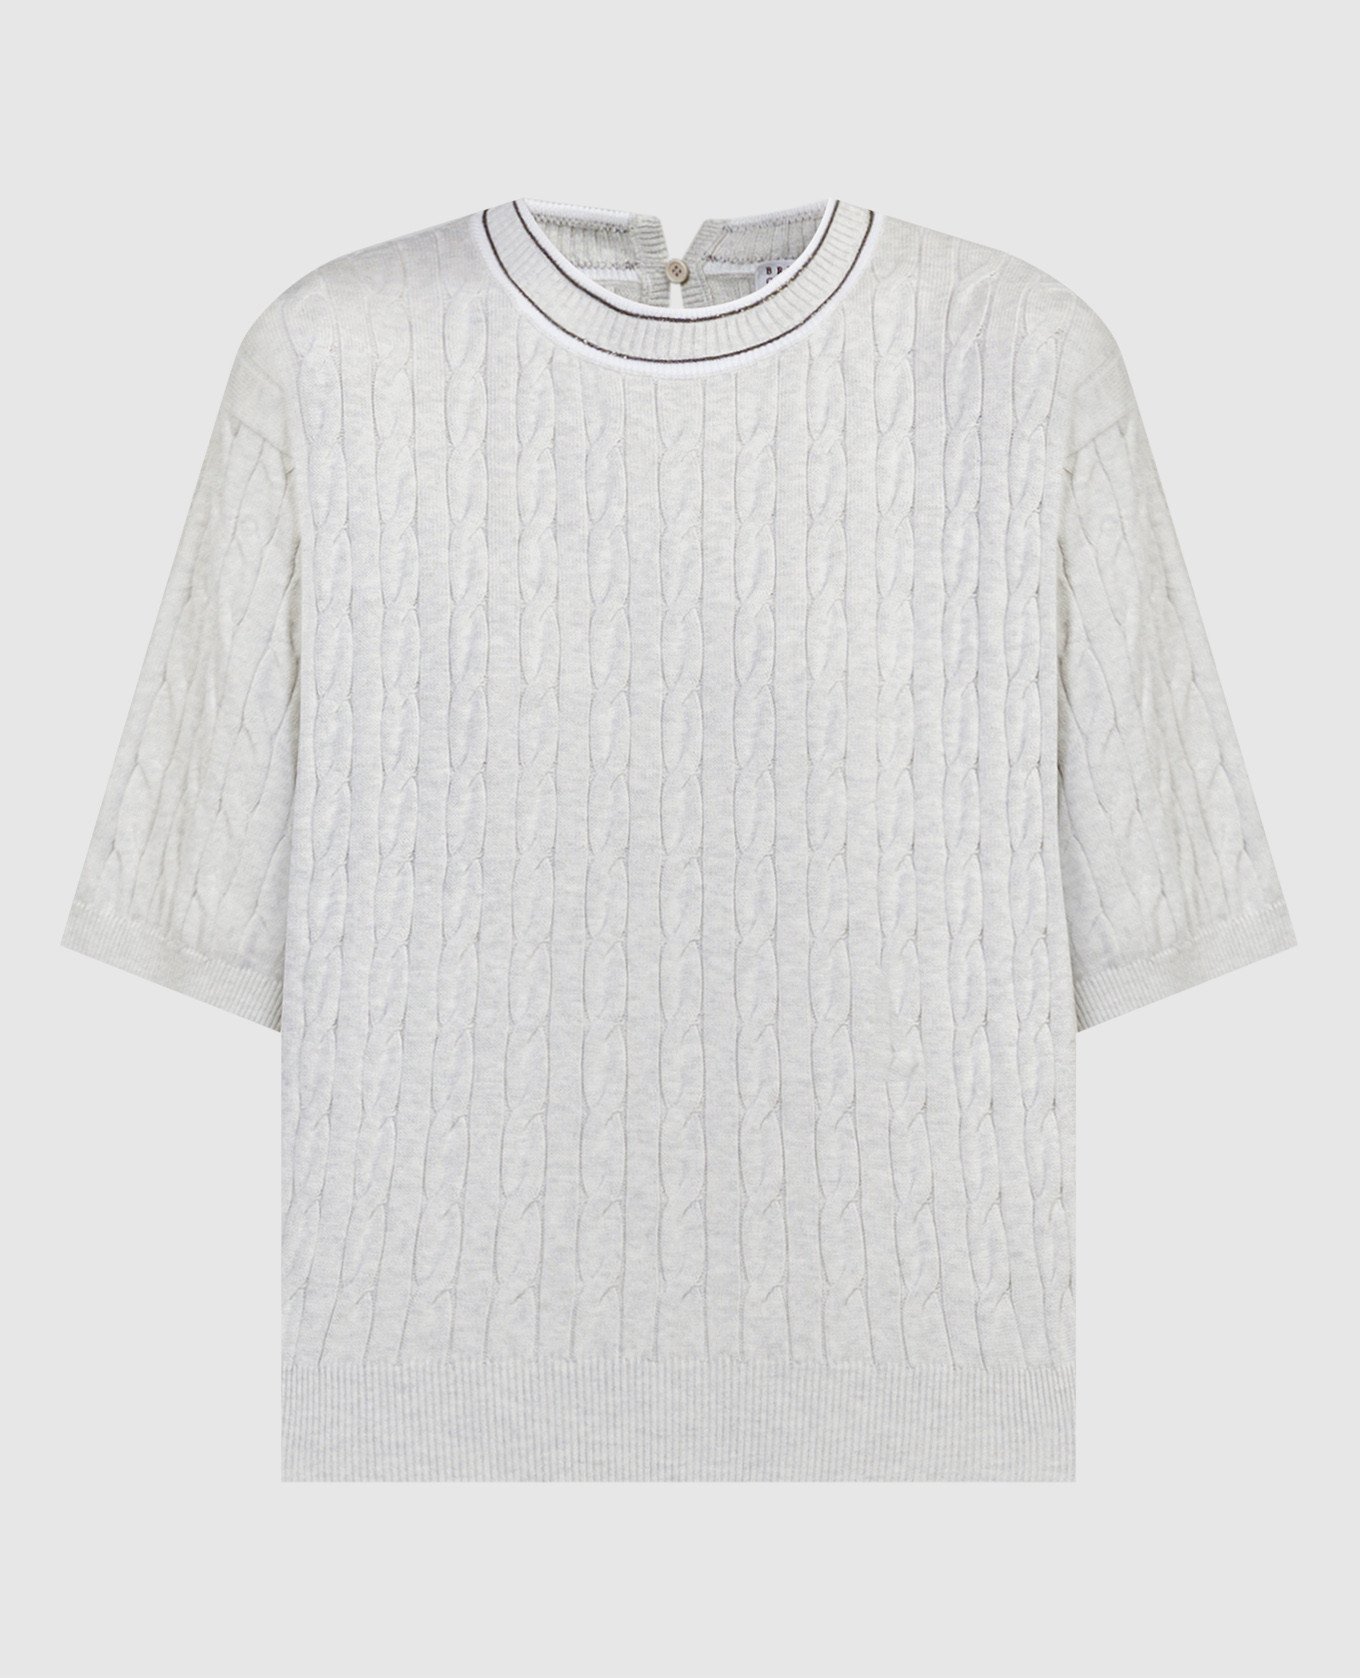 Gray t-shirt with a monil chain in a textured pattern